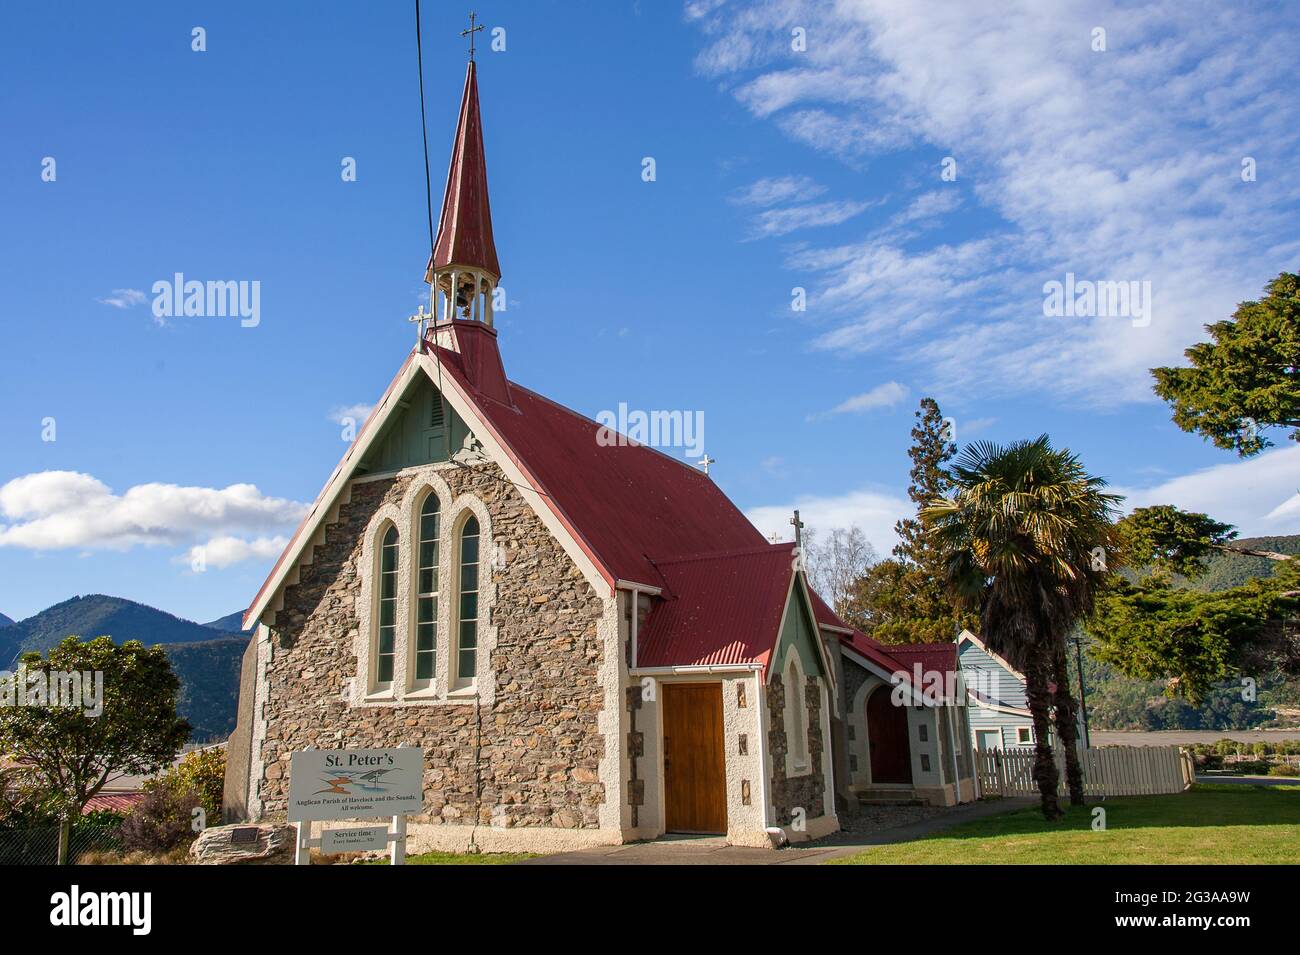 Havelock, New Zealand : St. Peter's Anglican Church, Havelock village, Marlborough, New Zealand. Old stone church with red roof in a rural landscape Stock Photo